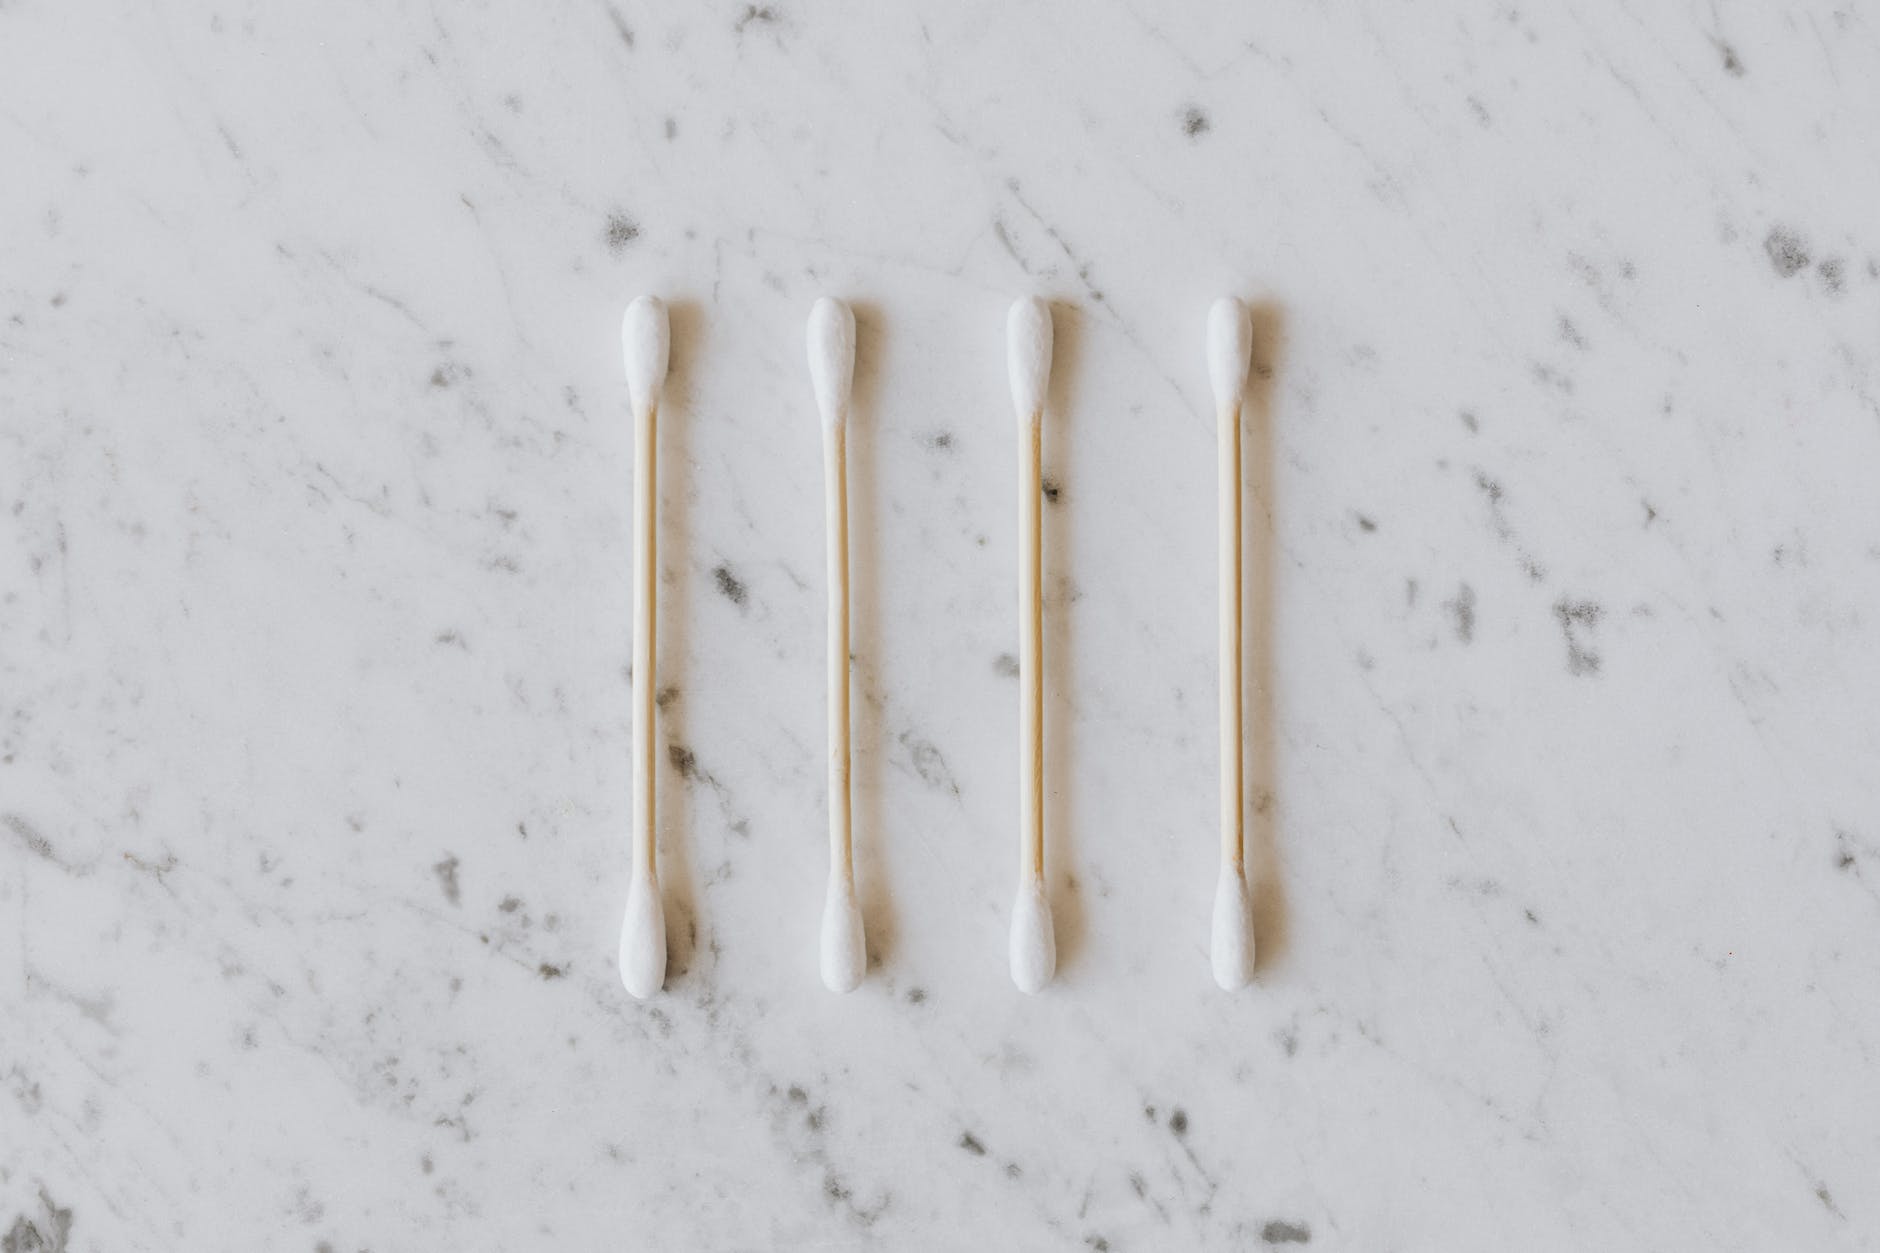 similar cotton ear buds on wooden sticks on table